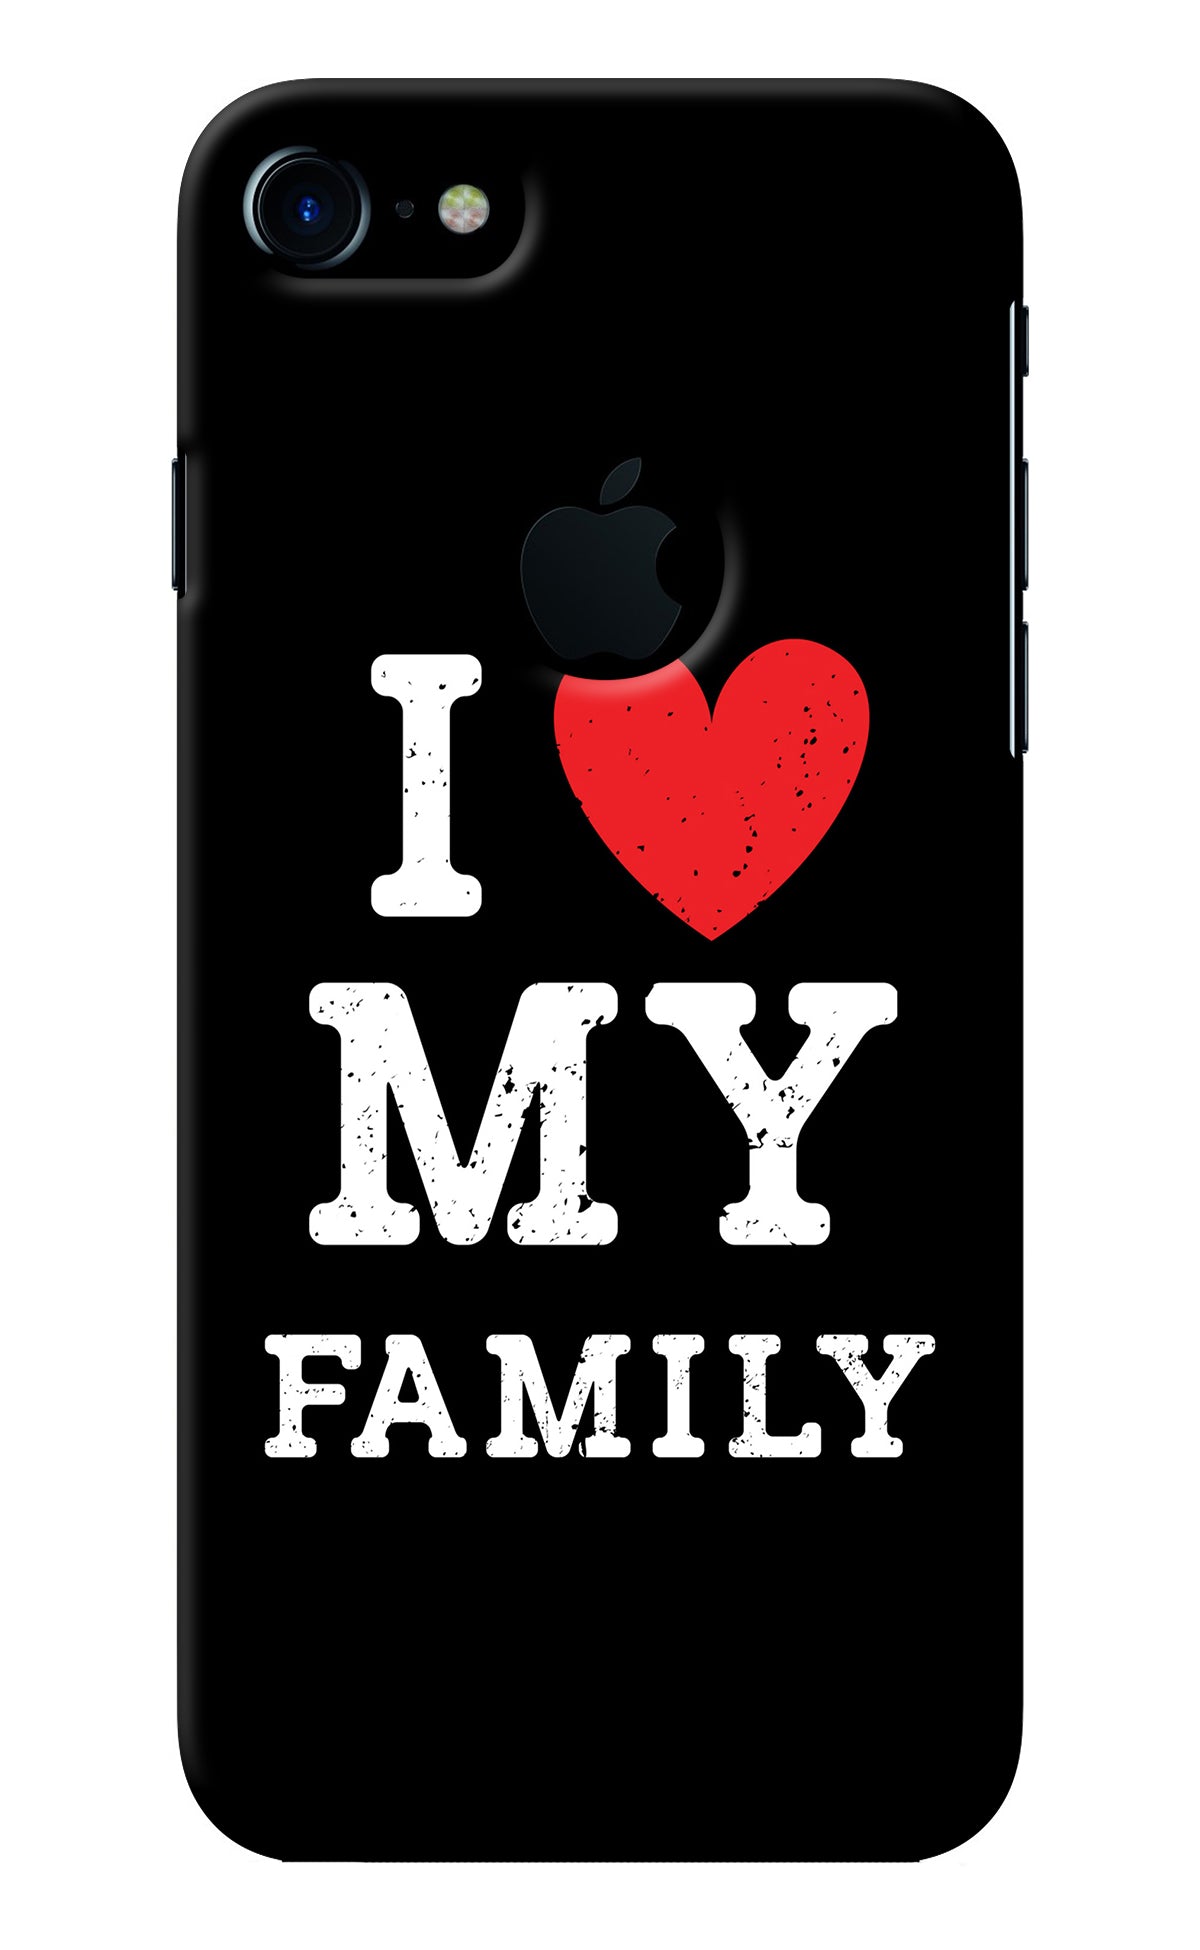 I Love My Family iPhone 7 Logocut Back Cover